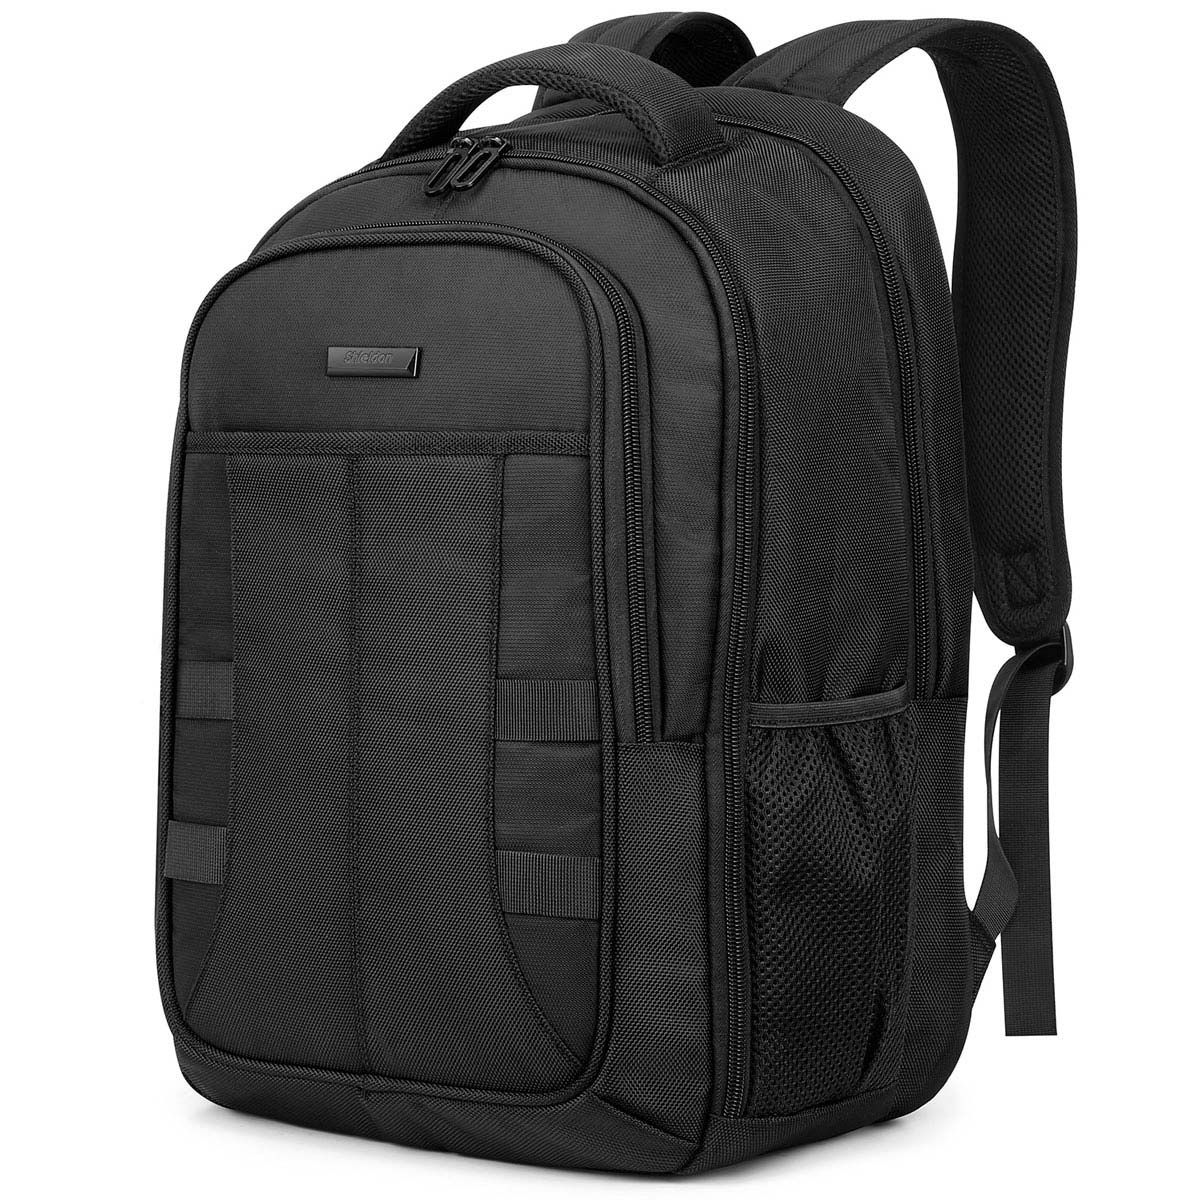 SHIELDON Travel Laptop Backpack, 15.6-inch Laptop Backpack, Carry-on ...